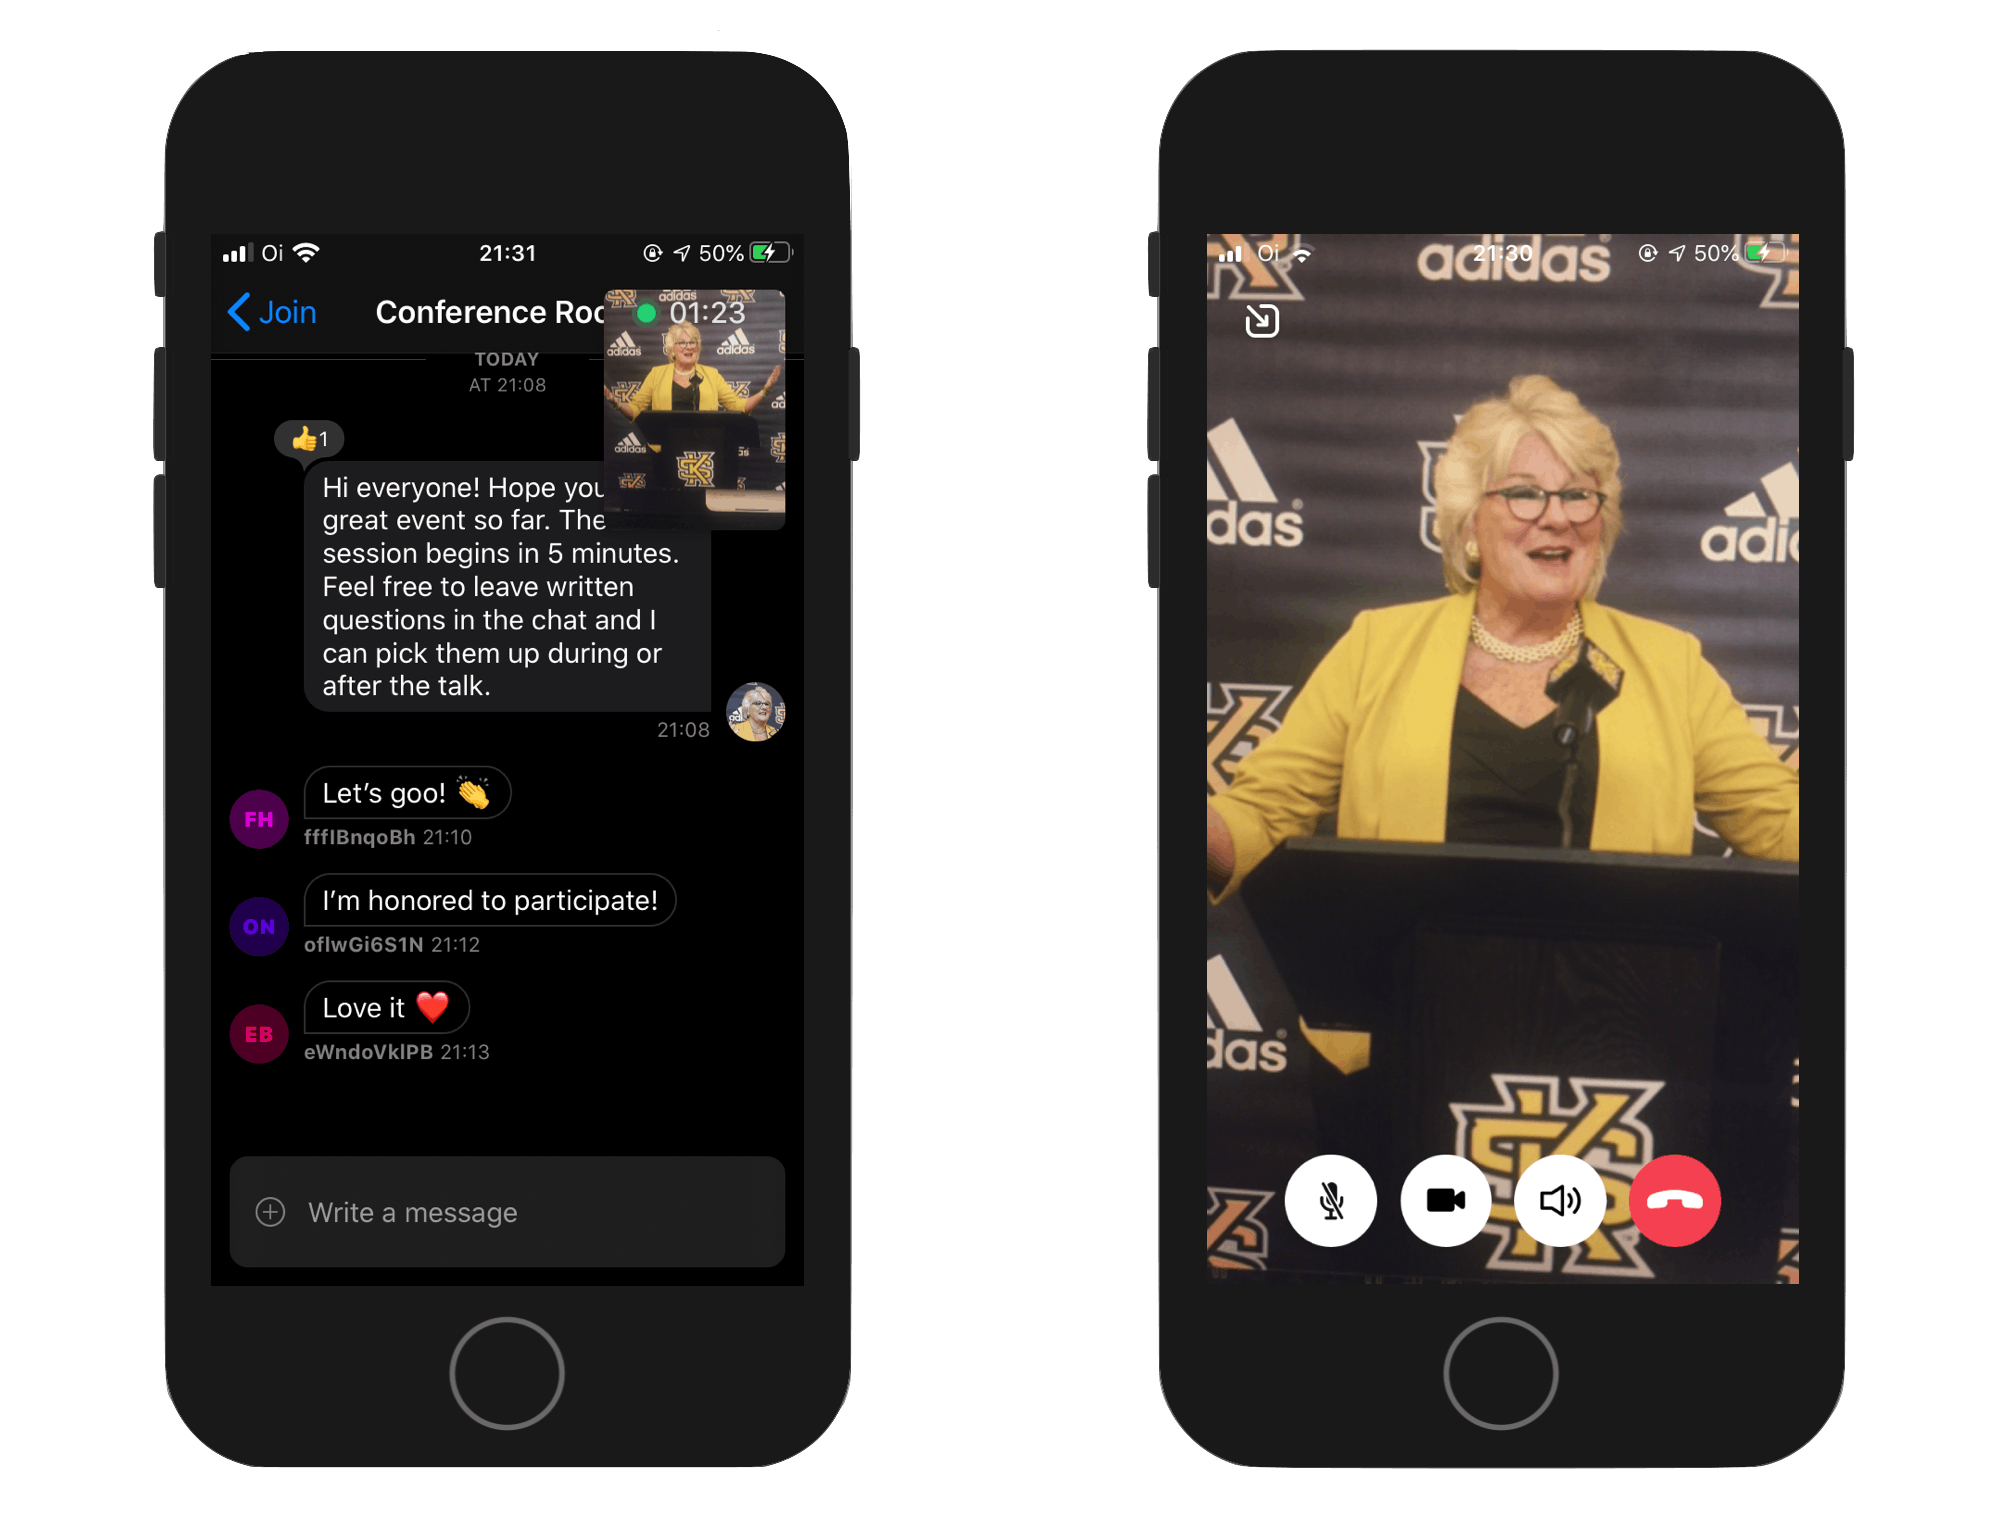 Image shows two screenshots of the completed event app, one from the chat screen with a small video overlay with the speaker, and another with a fullscreen livestream video of the speaker